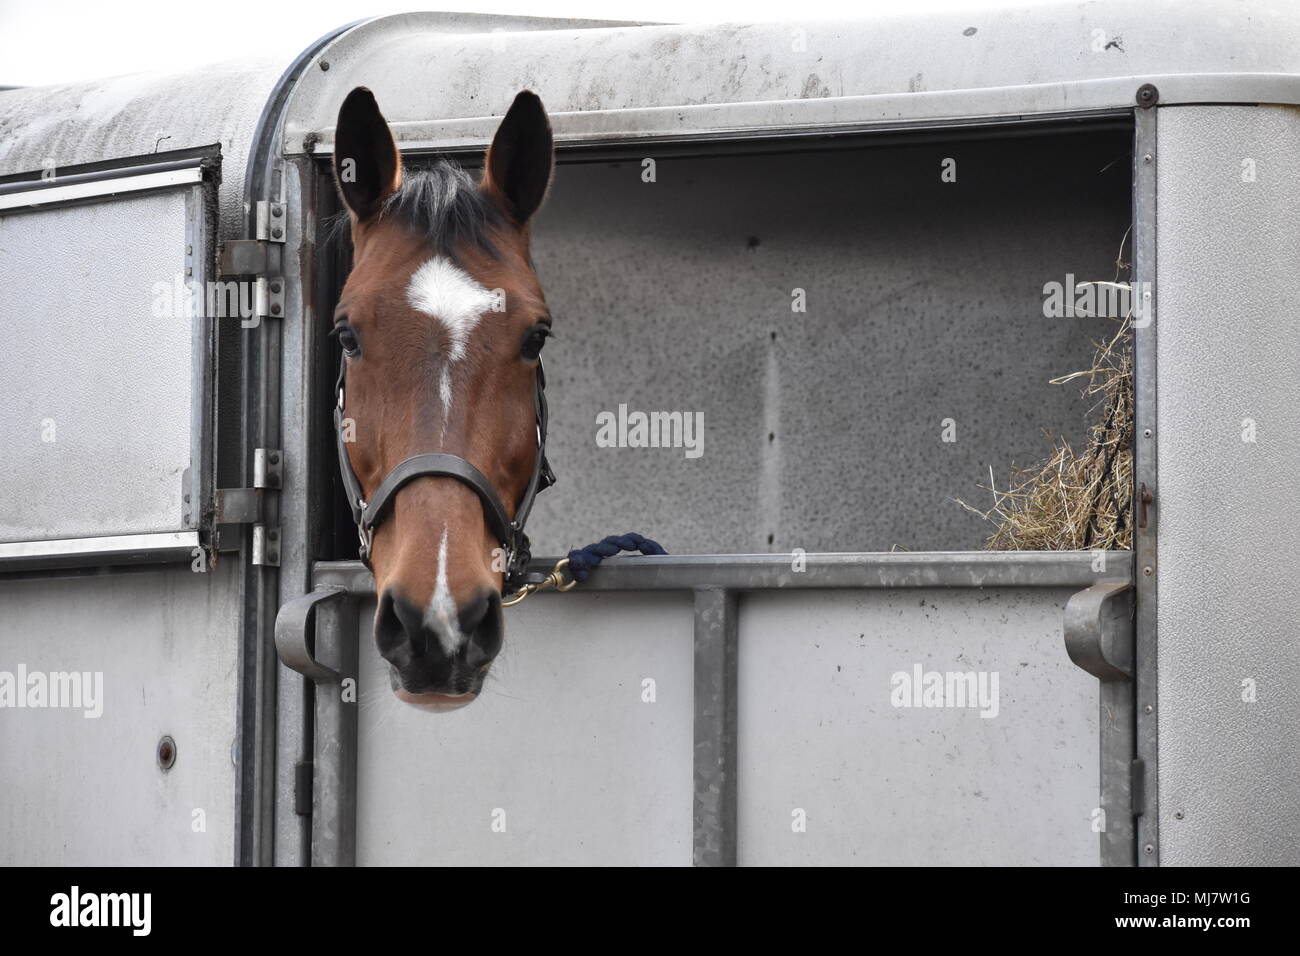 Cheeky horse keeping its eye on everyone from its for Williams trailer, equestrian competition travelling Stock Photo